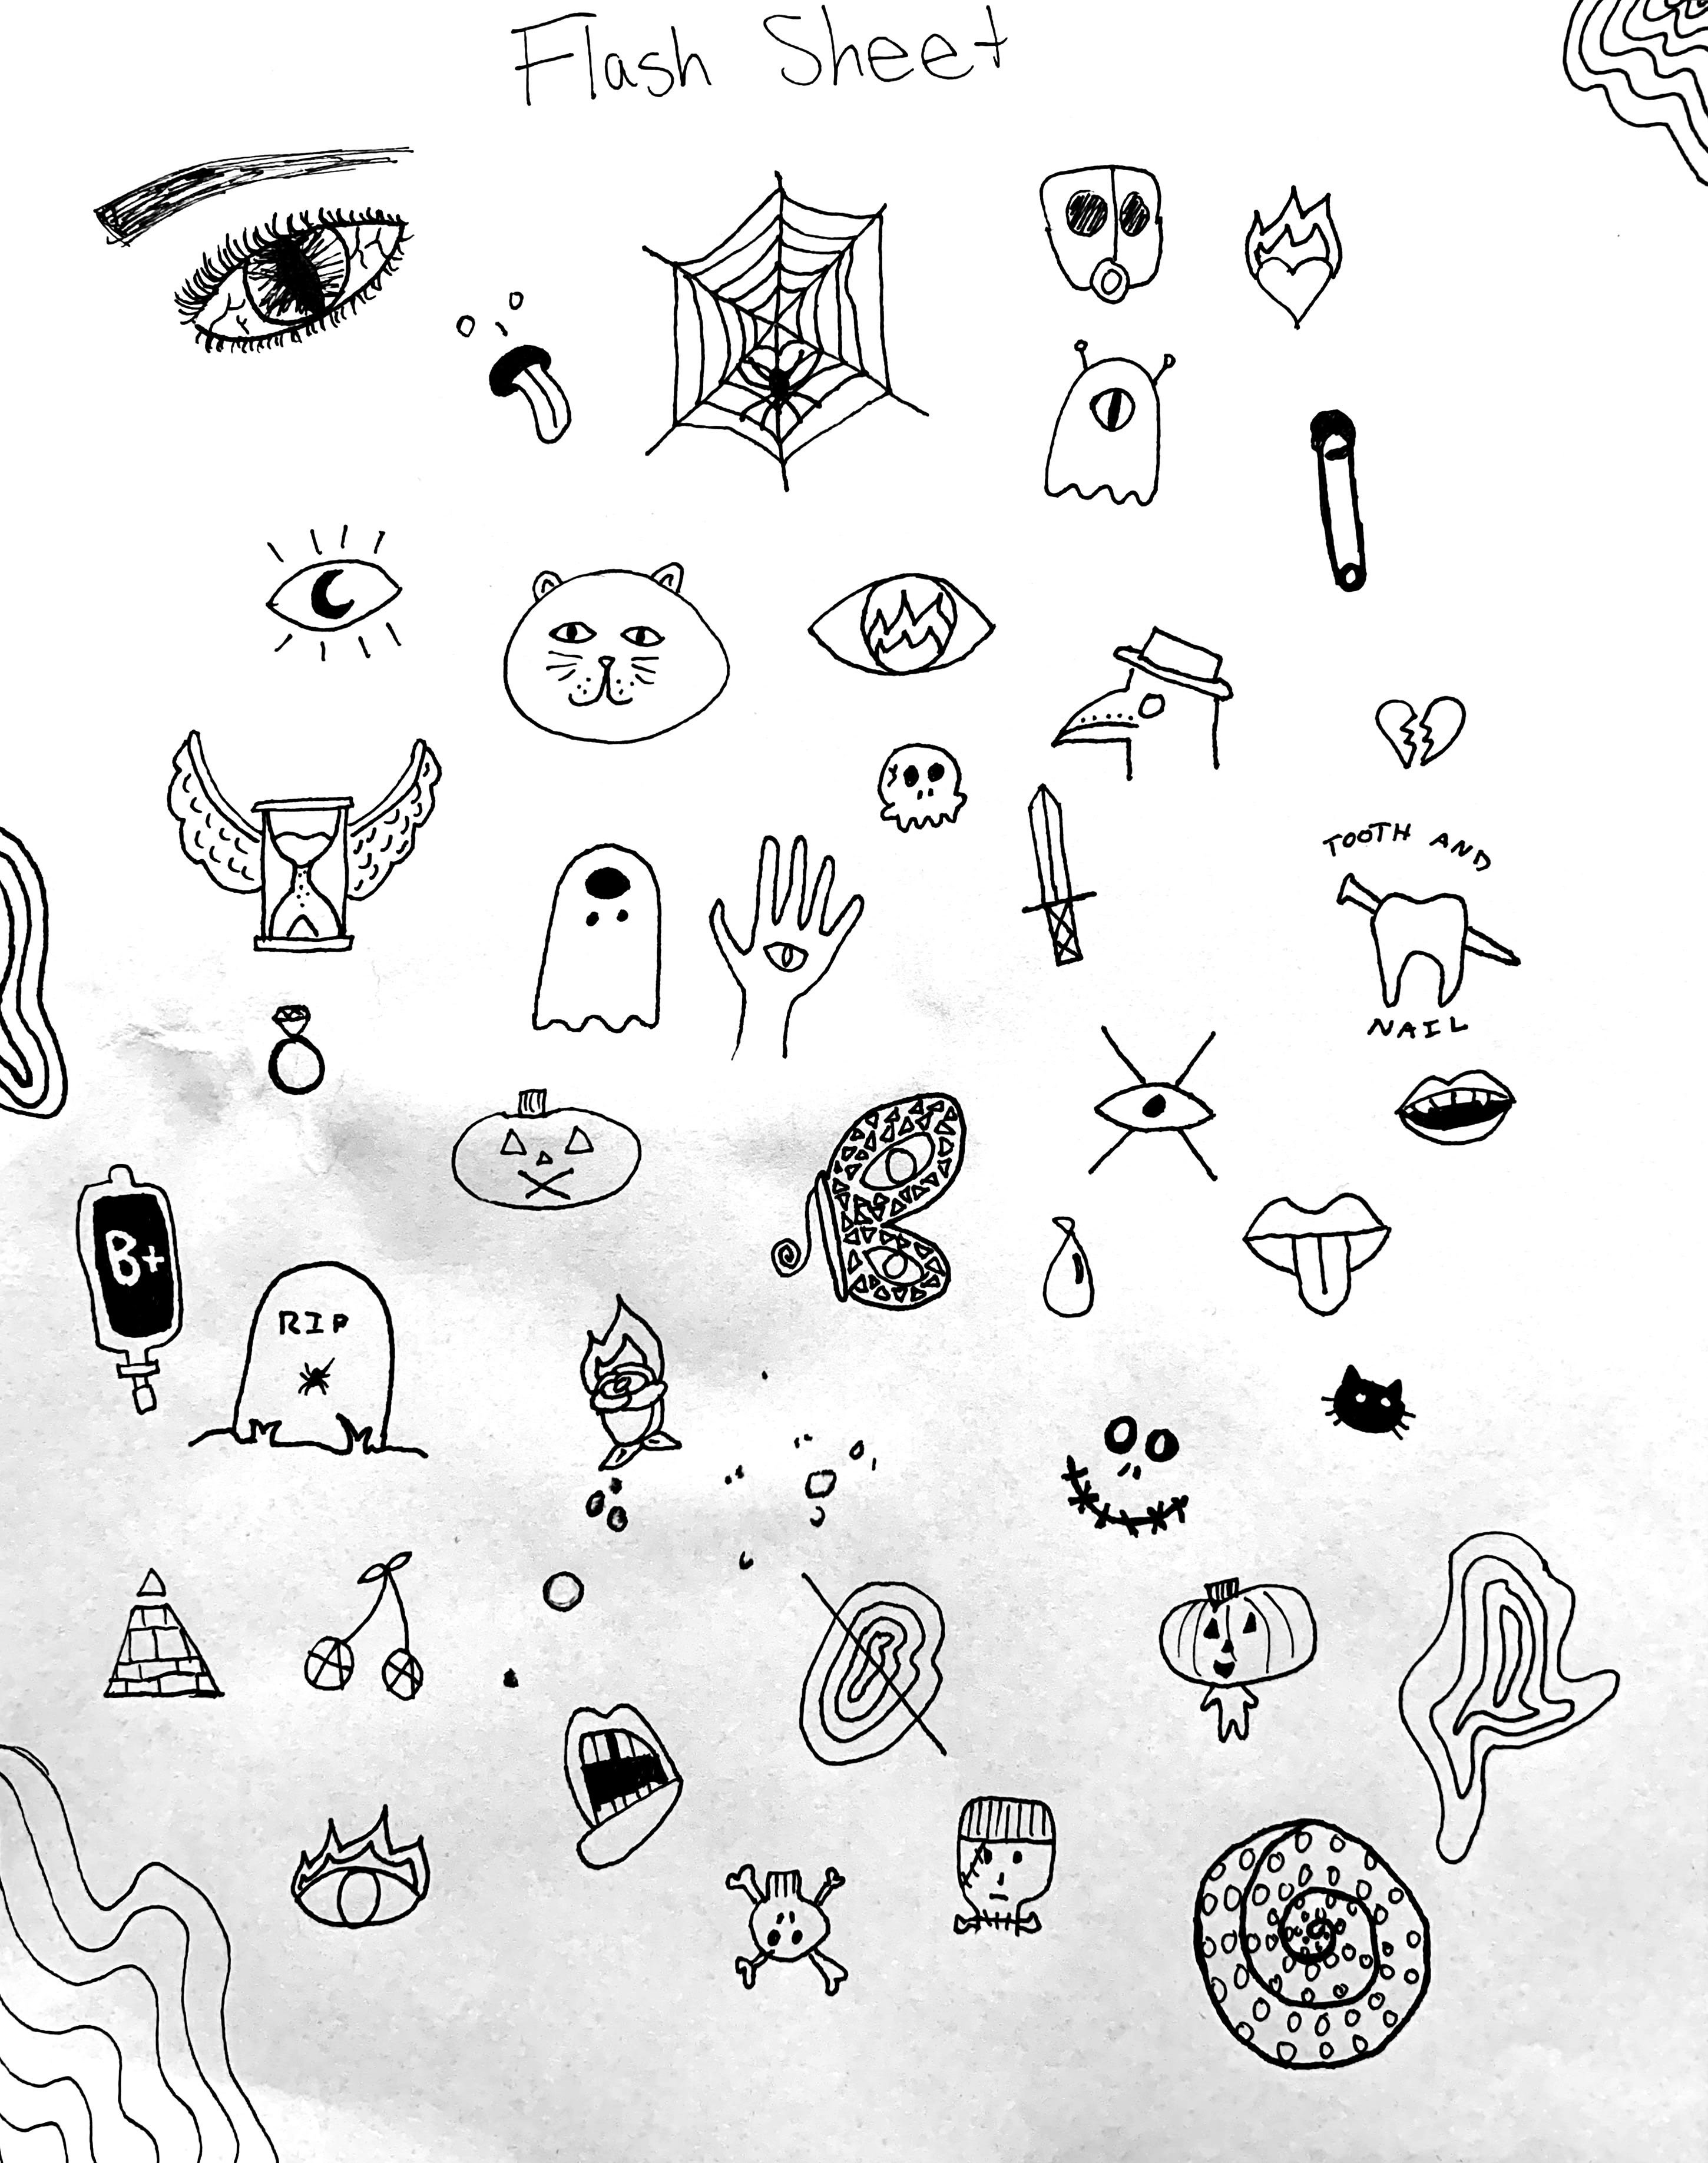 13963 Small Tattoo Drawing Images Stock Photos  Vectors  Shutterstock